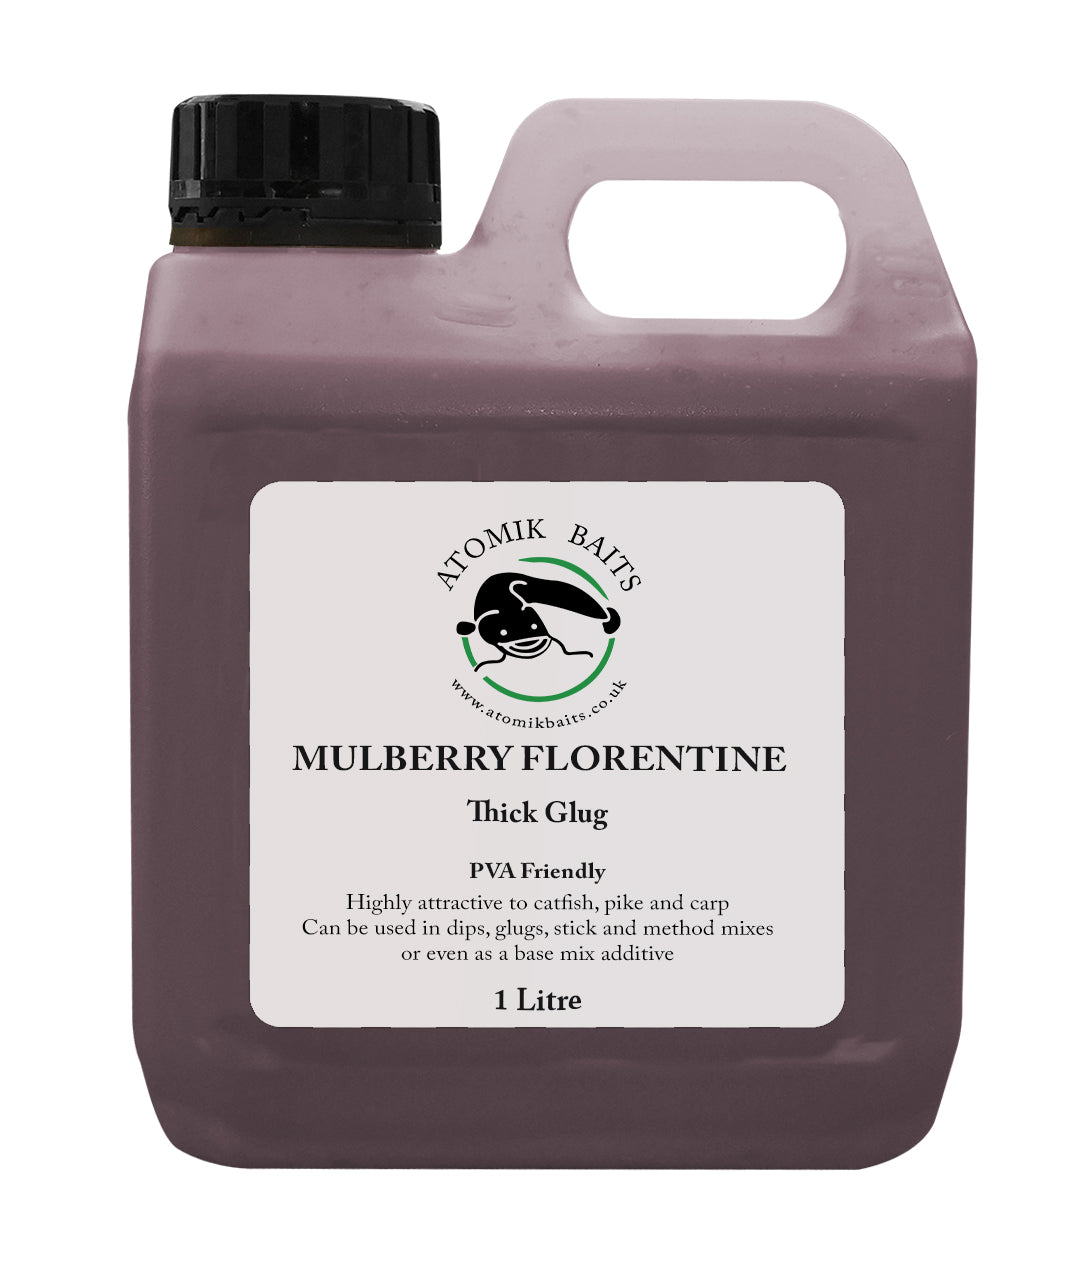 Mulberry Florentine Flavour - Glug, Particle Feed, Liquid Additive, Dip -1 Litre 1000ml